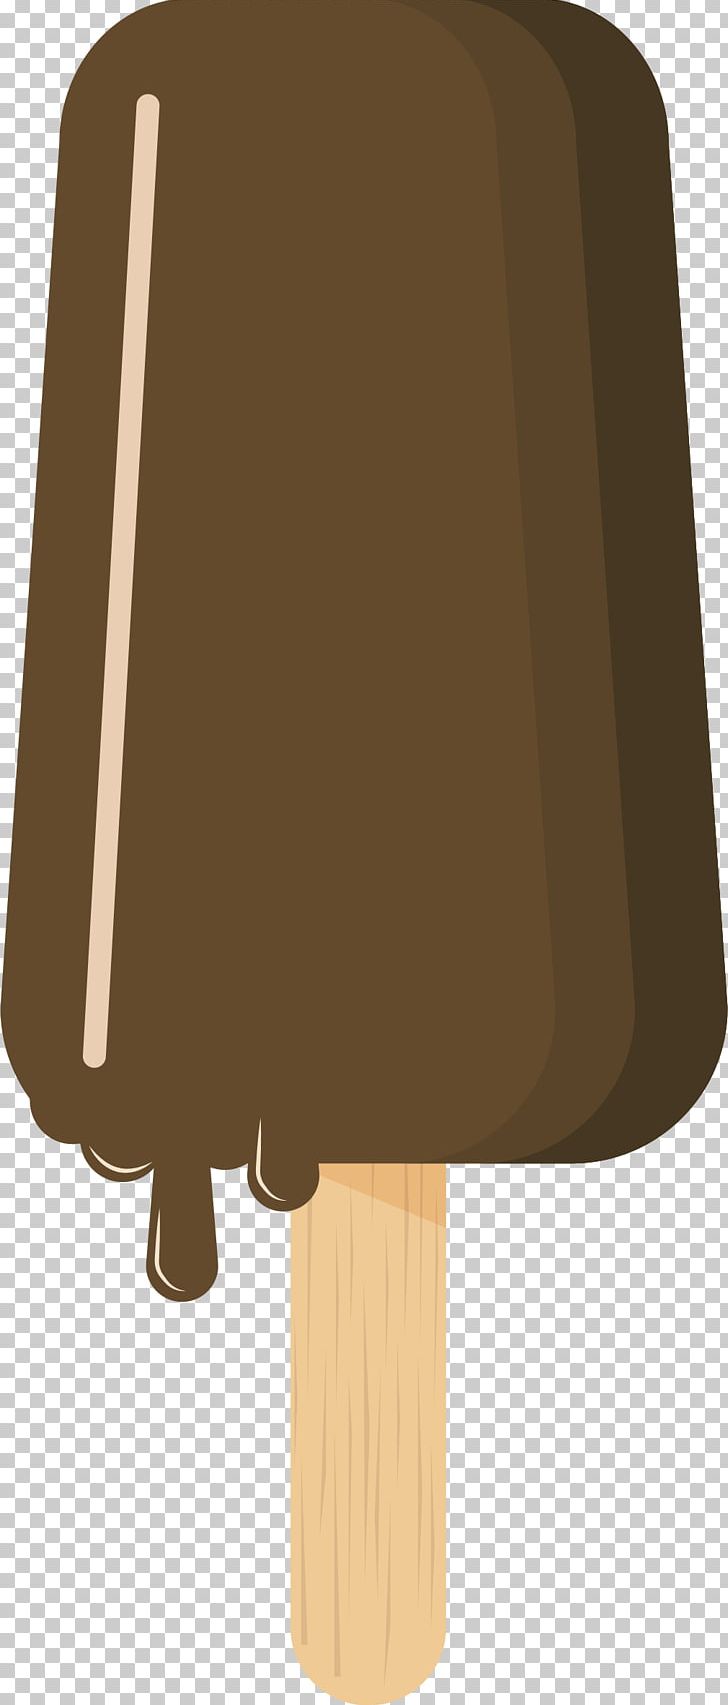 Confectionery Frozen Food Ice Cream Chocolate Bar PNG, Clipart, Angle, Cartoon, Chocolate, Chocolate Bar, Confectionery Free PNG Download